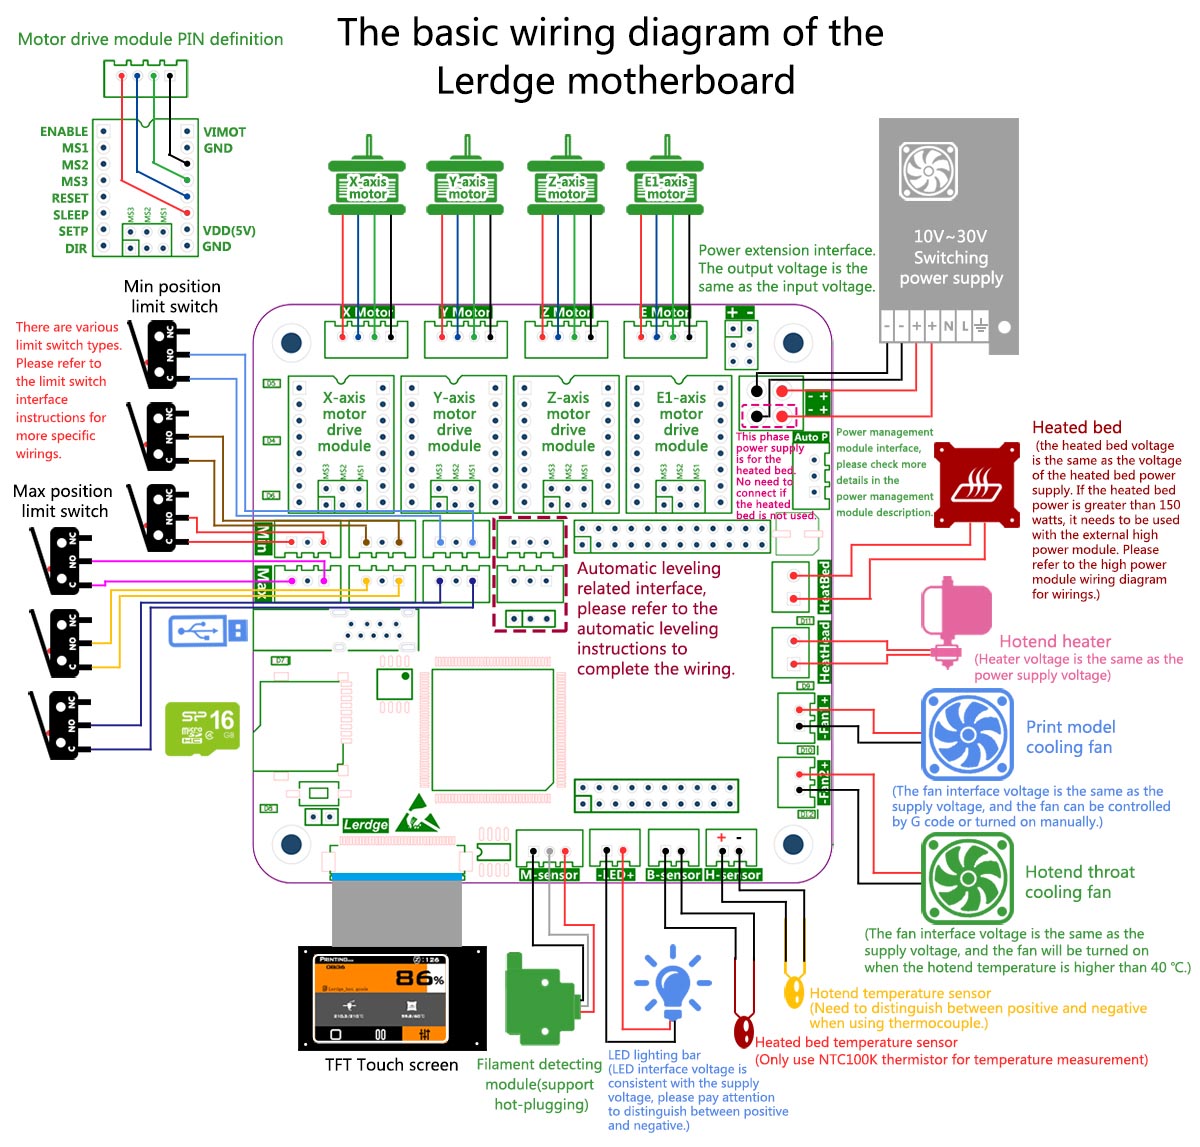 The Basic Wiring Diagram Of The Lerdge Motherboard